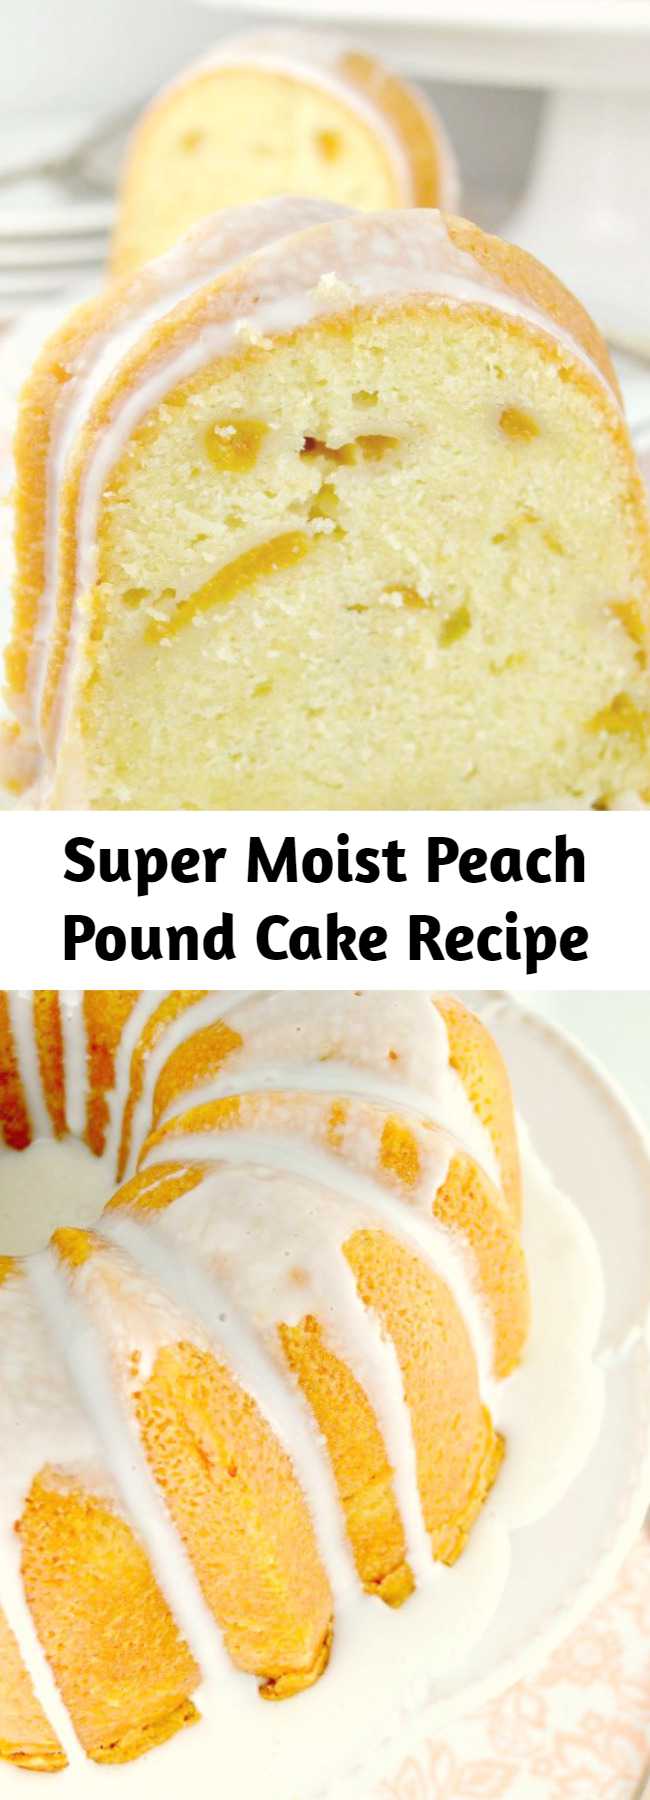 The BEST Peach Pound Cake ~ A Buttery, Tender, Super Moist, Sour Cream Pound Cake Loaded With Fresh, Juicy Peaches!